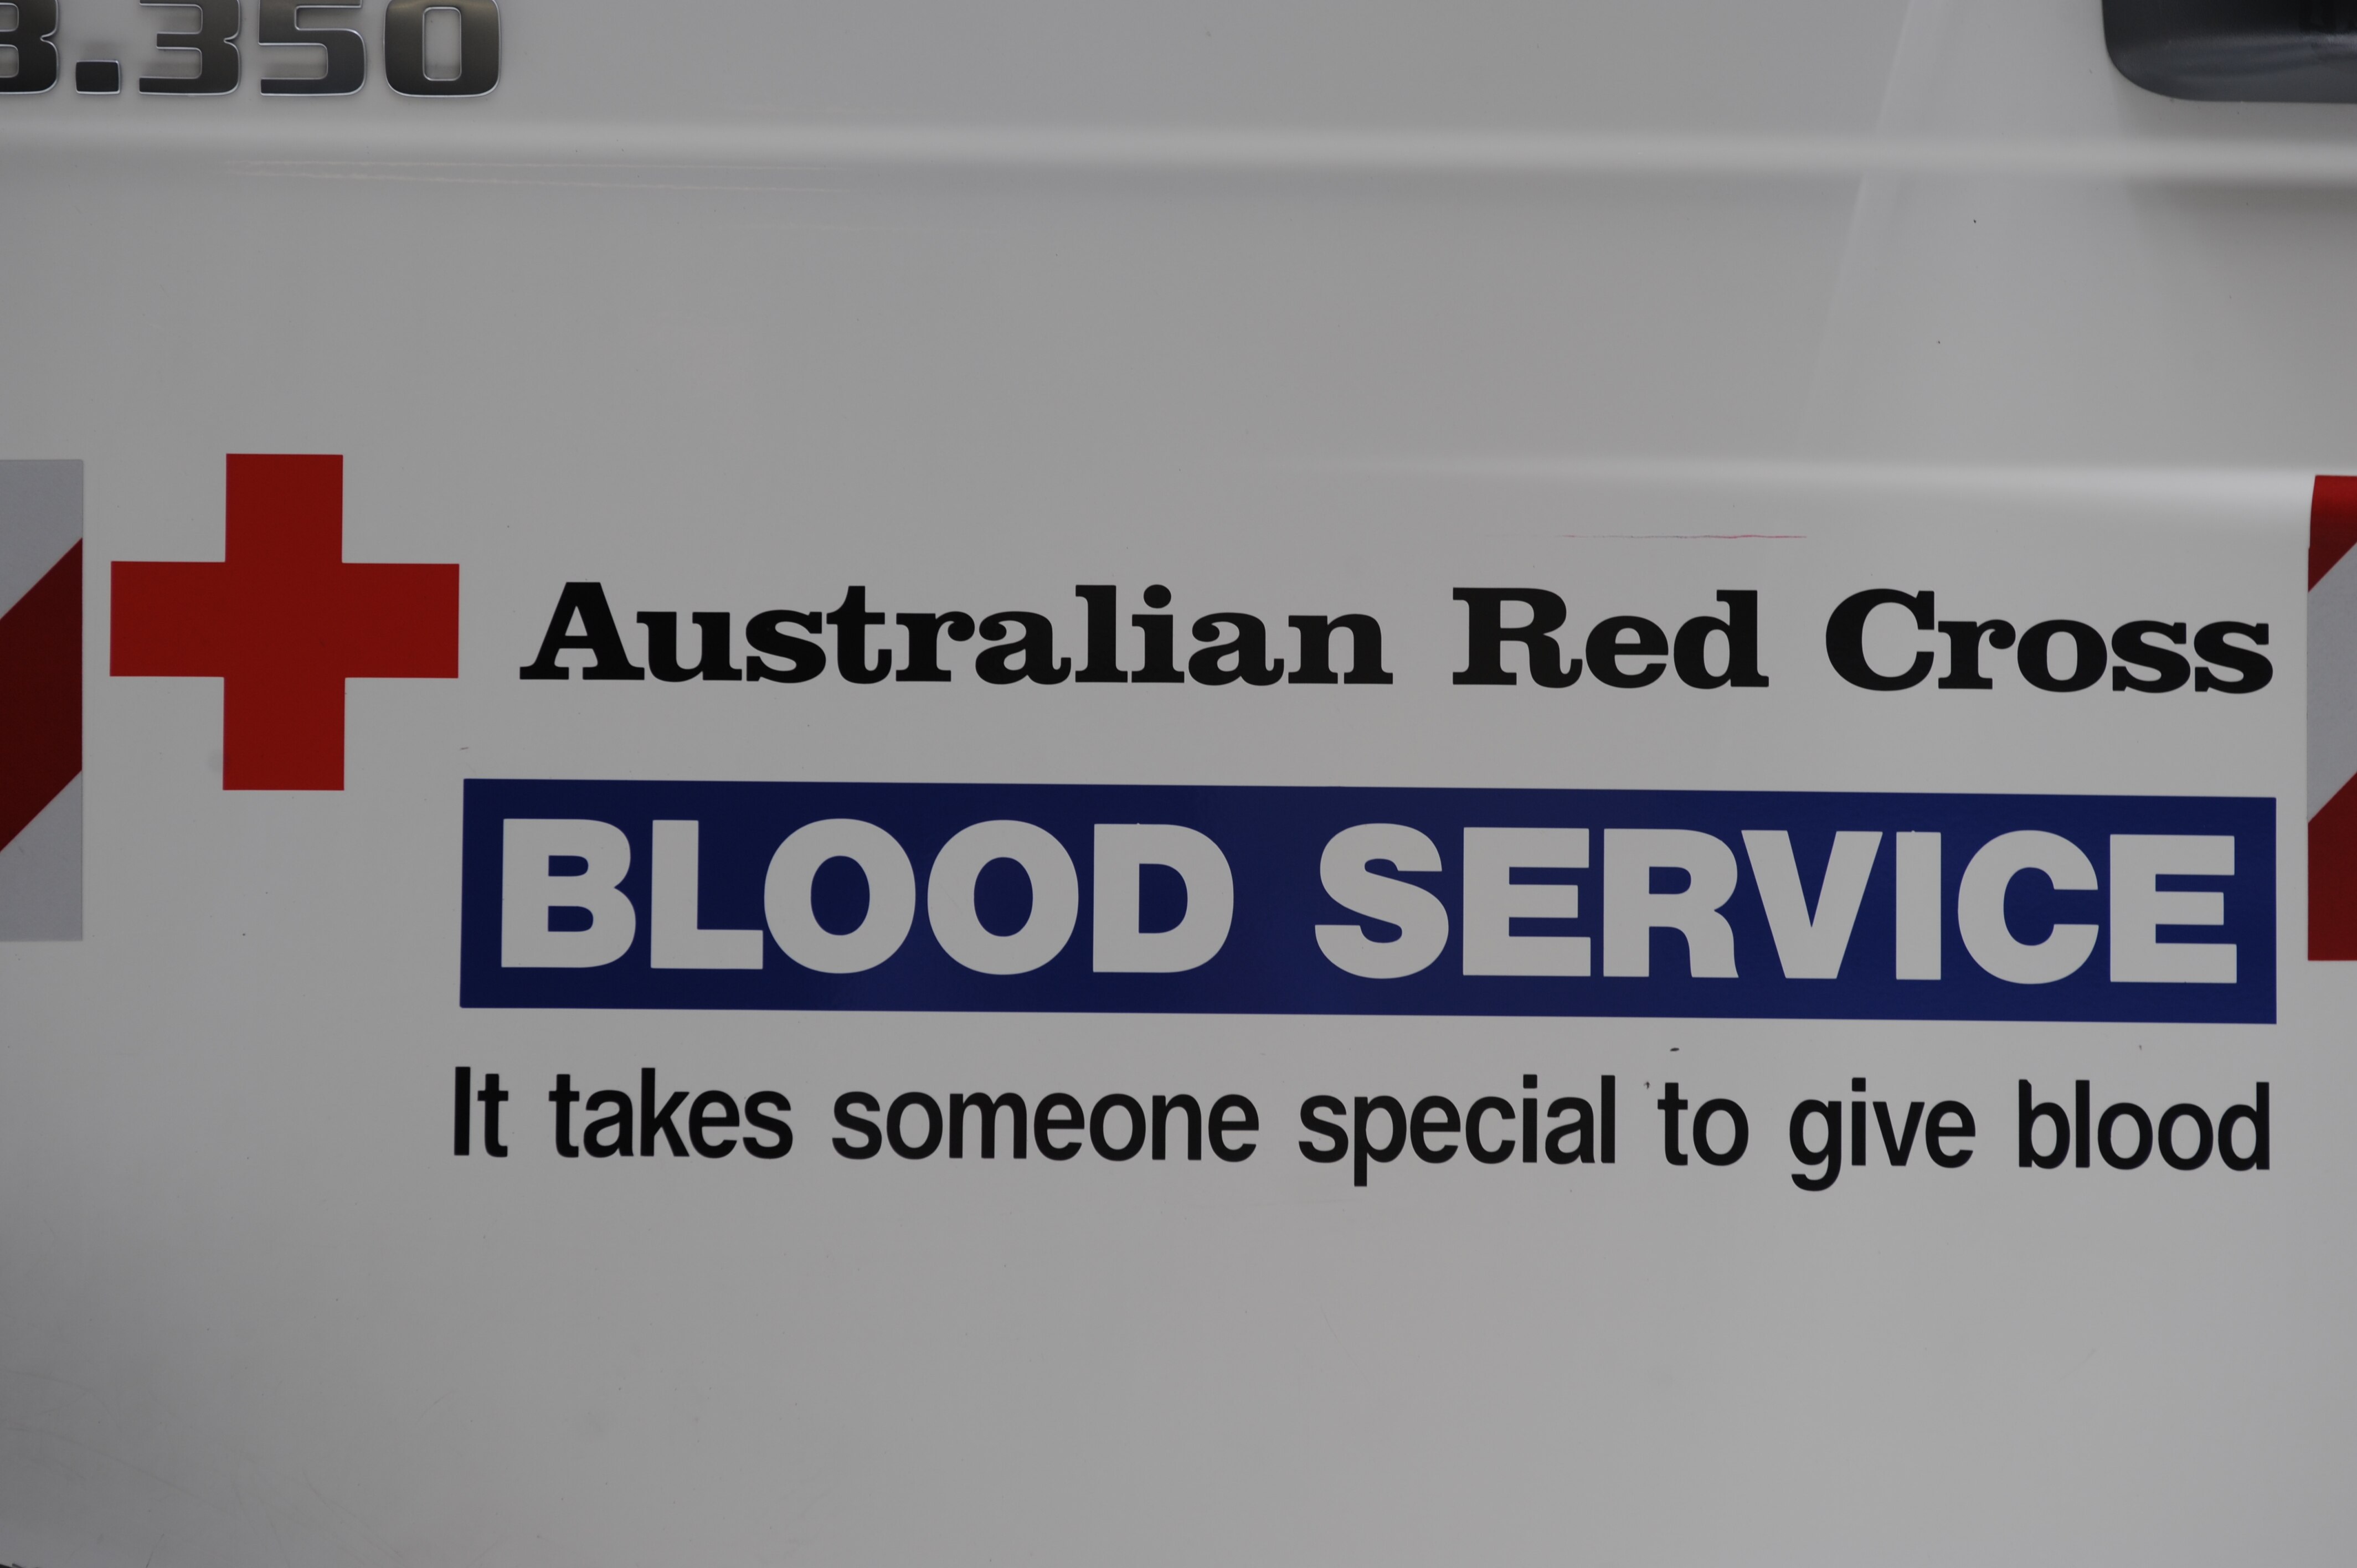 It takes someone special to give blood